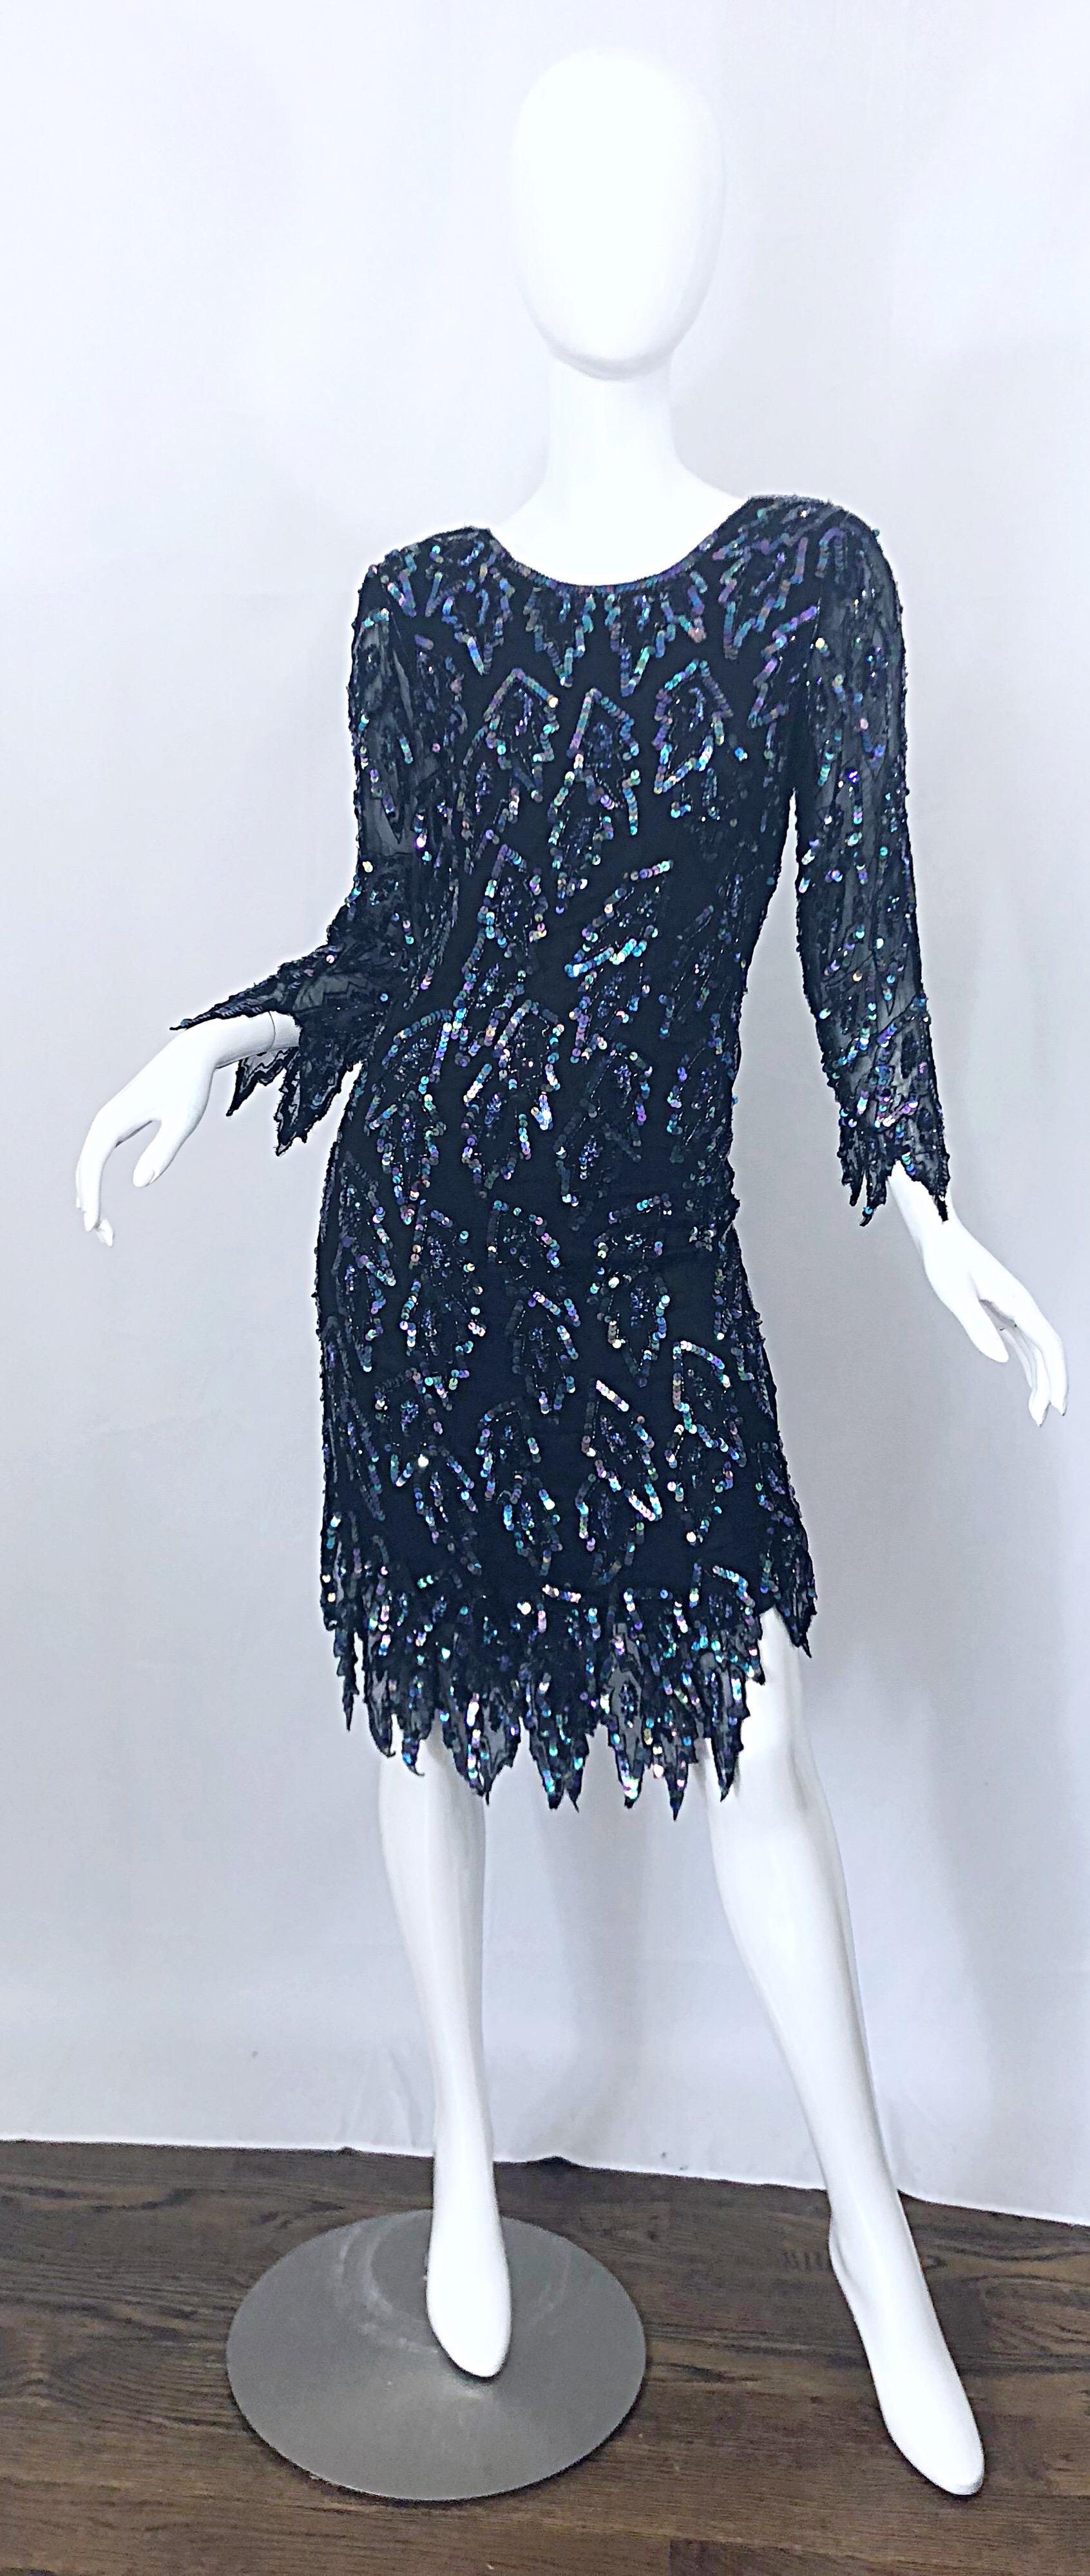 Stunning early 1990s black silk chiffon carwash hem sequined flapper inspired dress! Features luxurious silk chiffon layers with thousands of hand-sewn iridescent metallic sequins. Asymmetrical car wash hem looks fabulous with movement, and are also